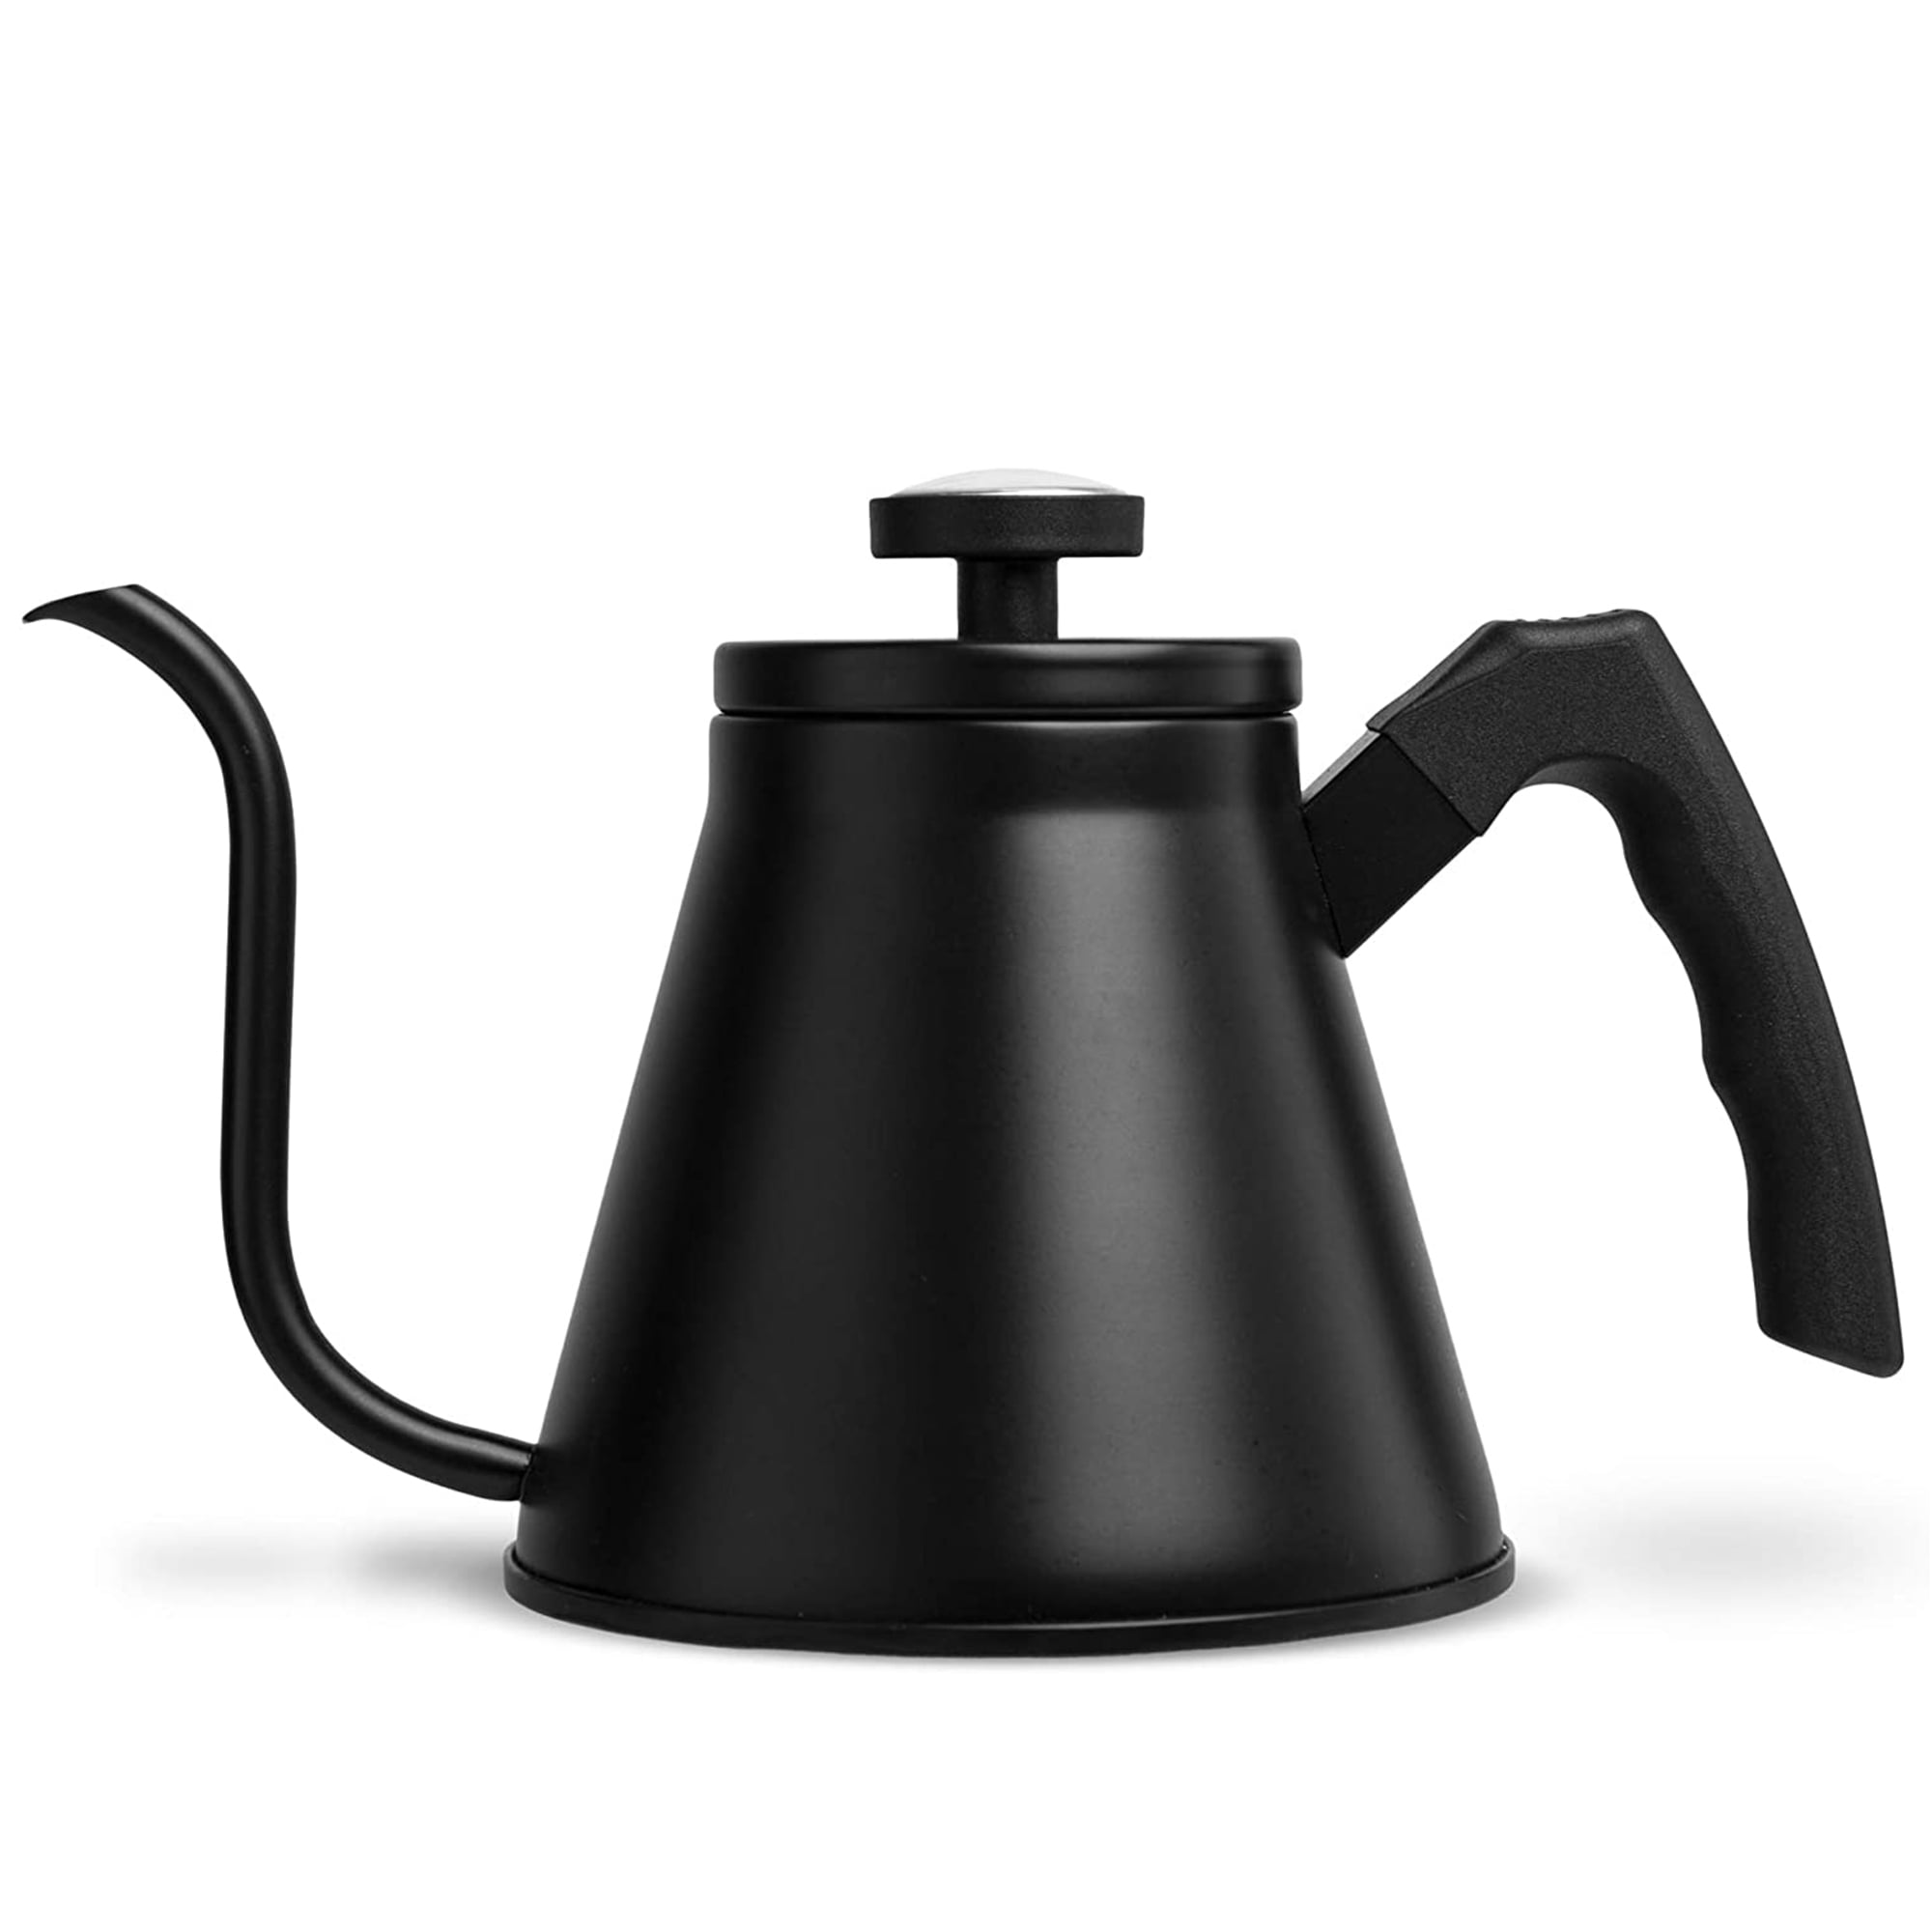 Restpresso 12 oz Black Stainless Steel Pour Over / Gooseneck Kettle - 7 x  3 1/4 x 4 - 1 count box